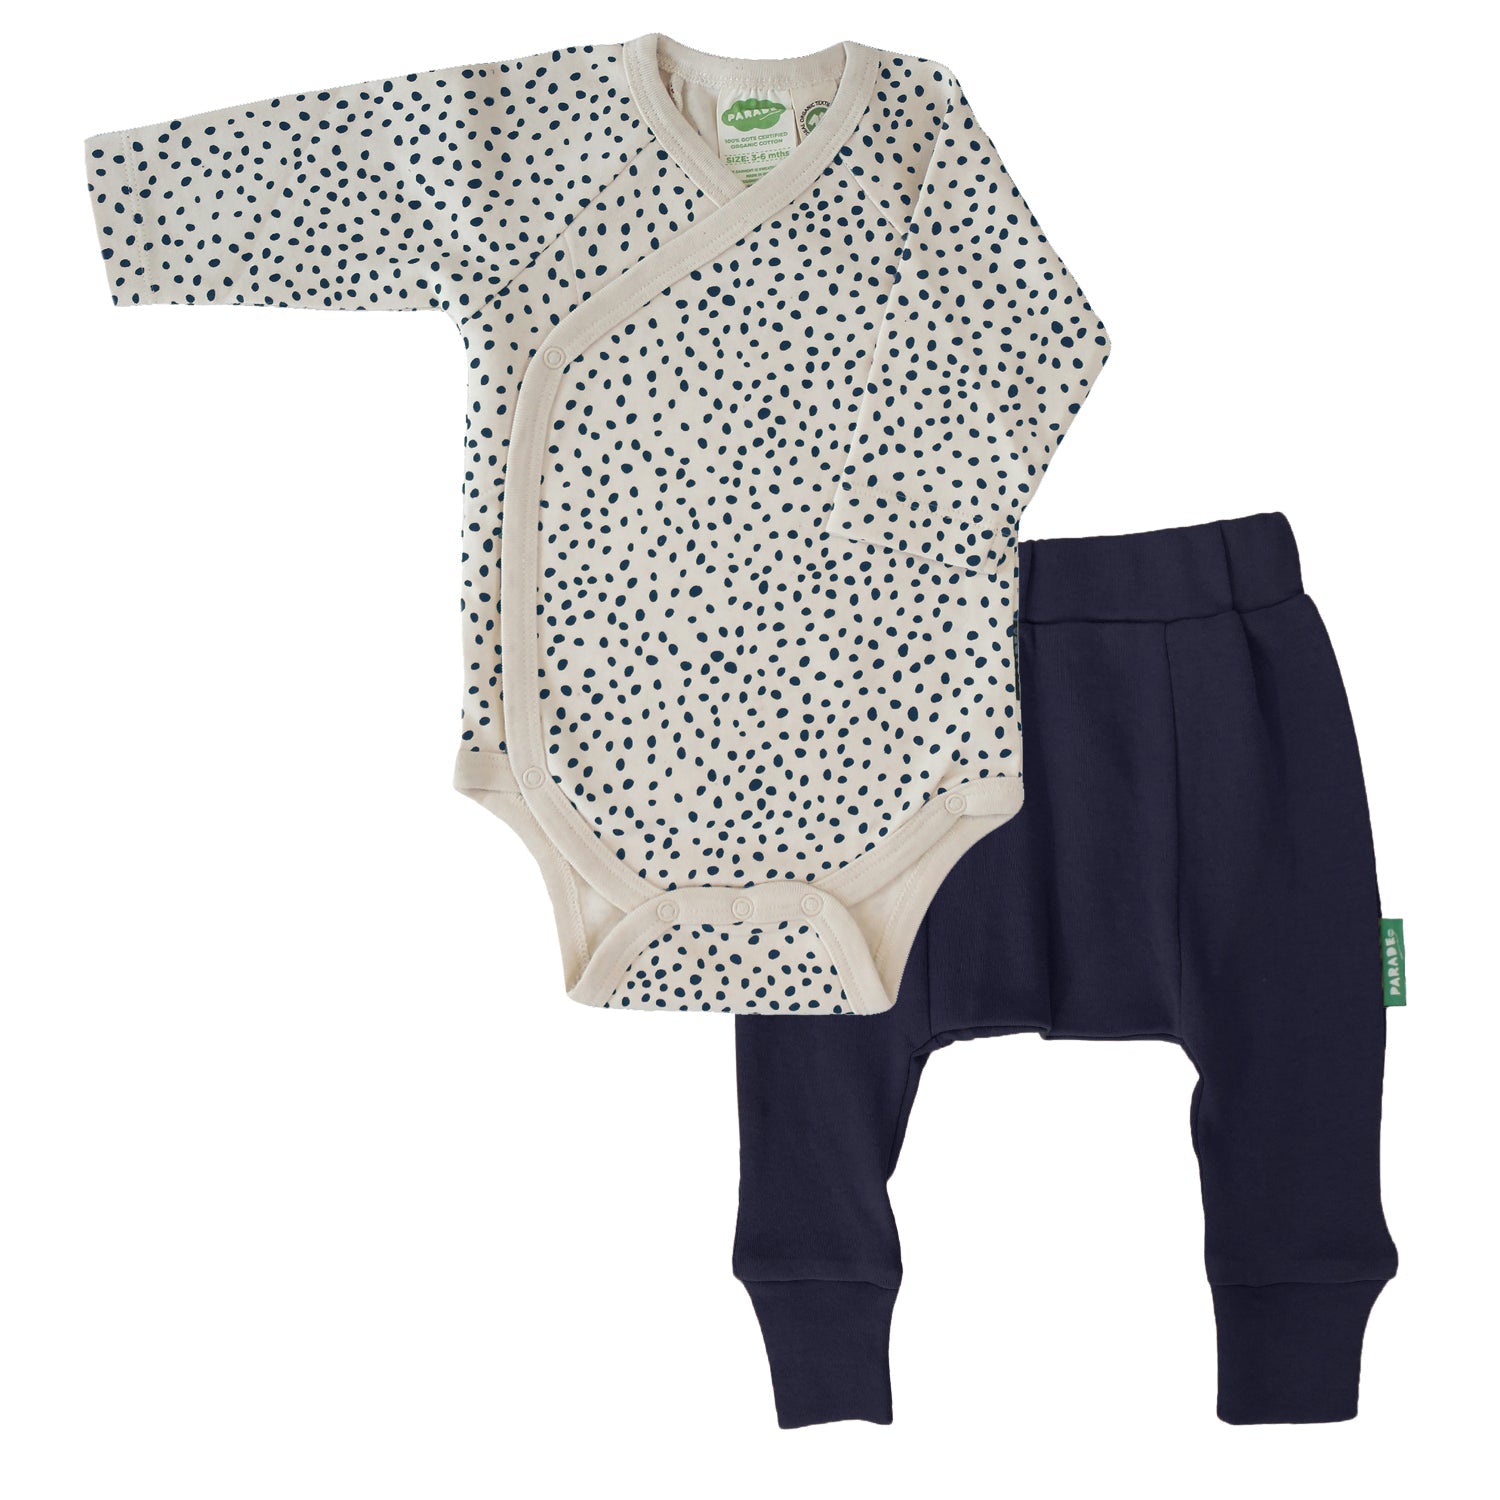 Onesie Playsuit Bundle - Long Sleeve - Organic Baby Clothes, Kids Clothes, & Gifts | Parade Organics